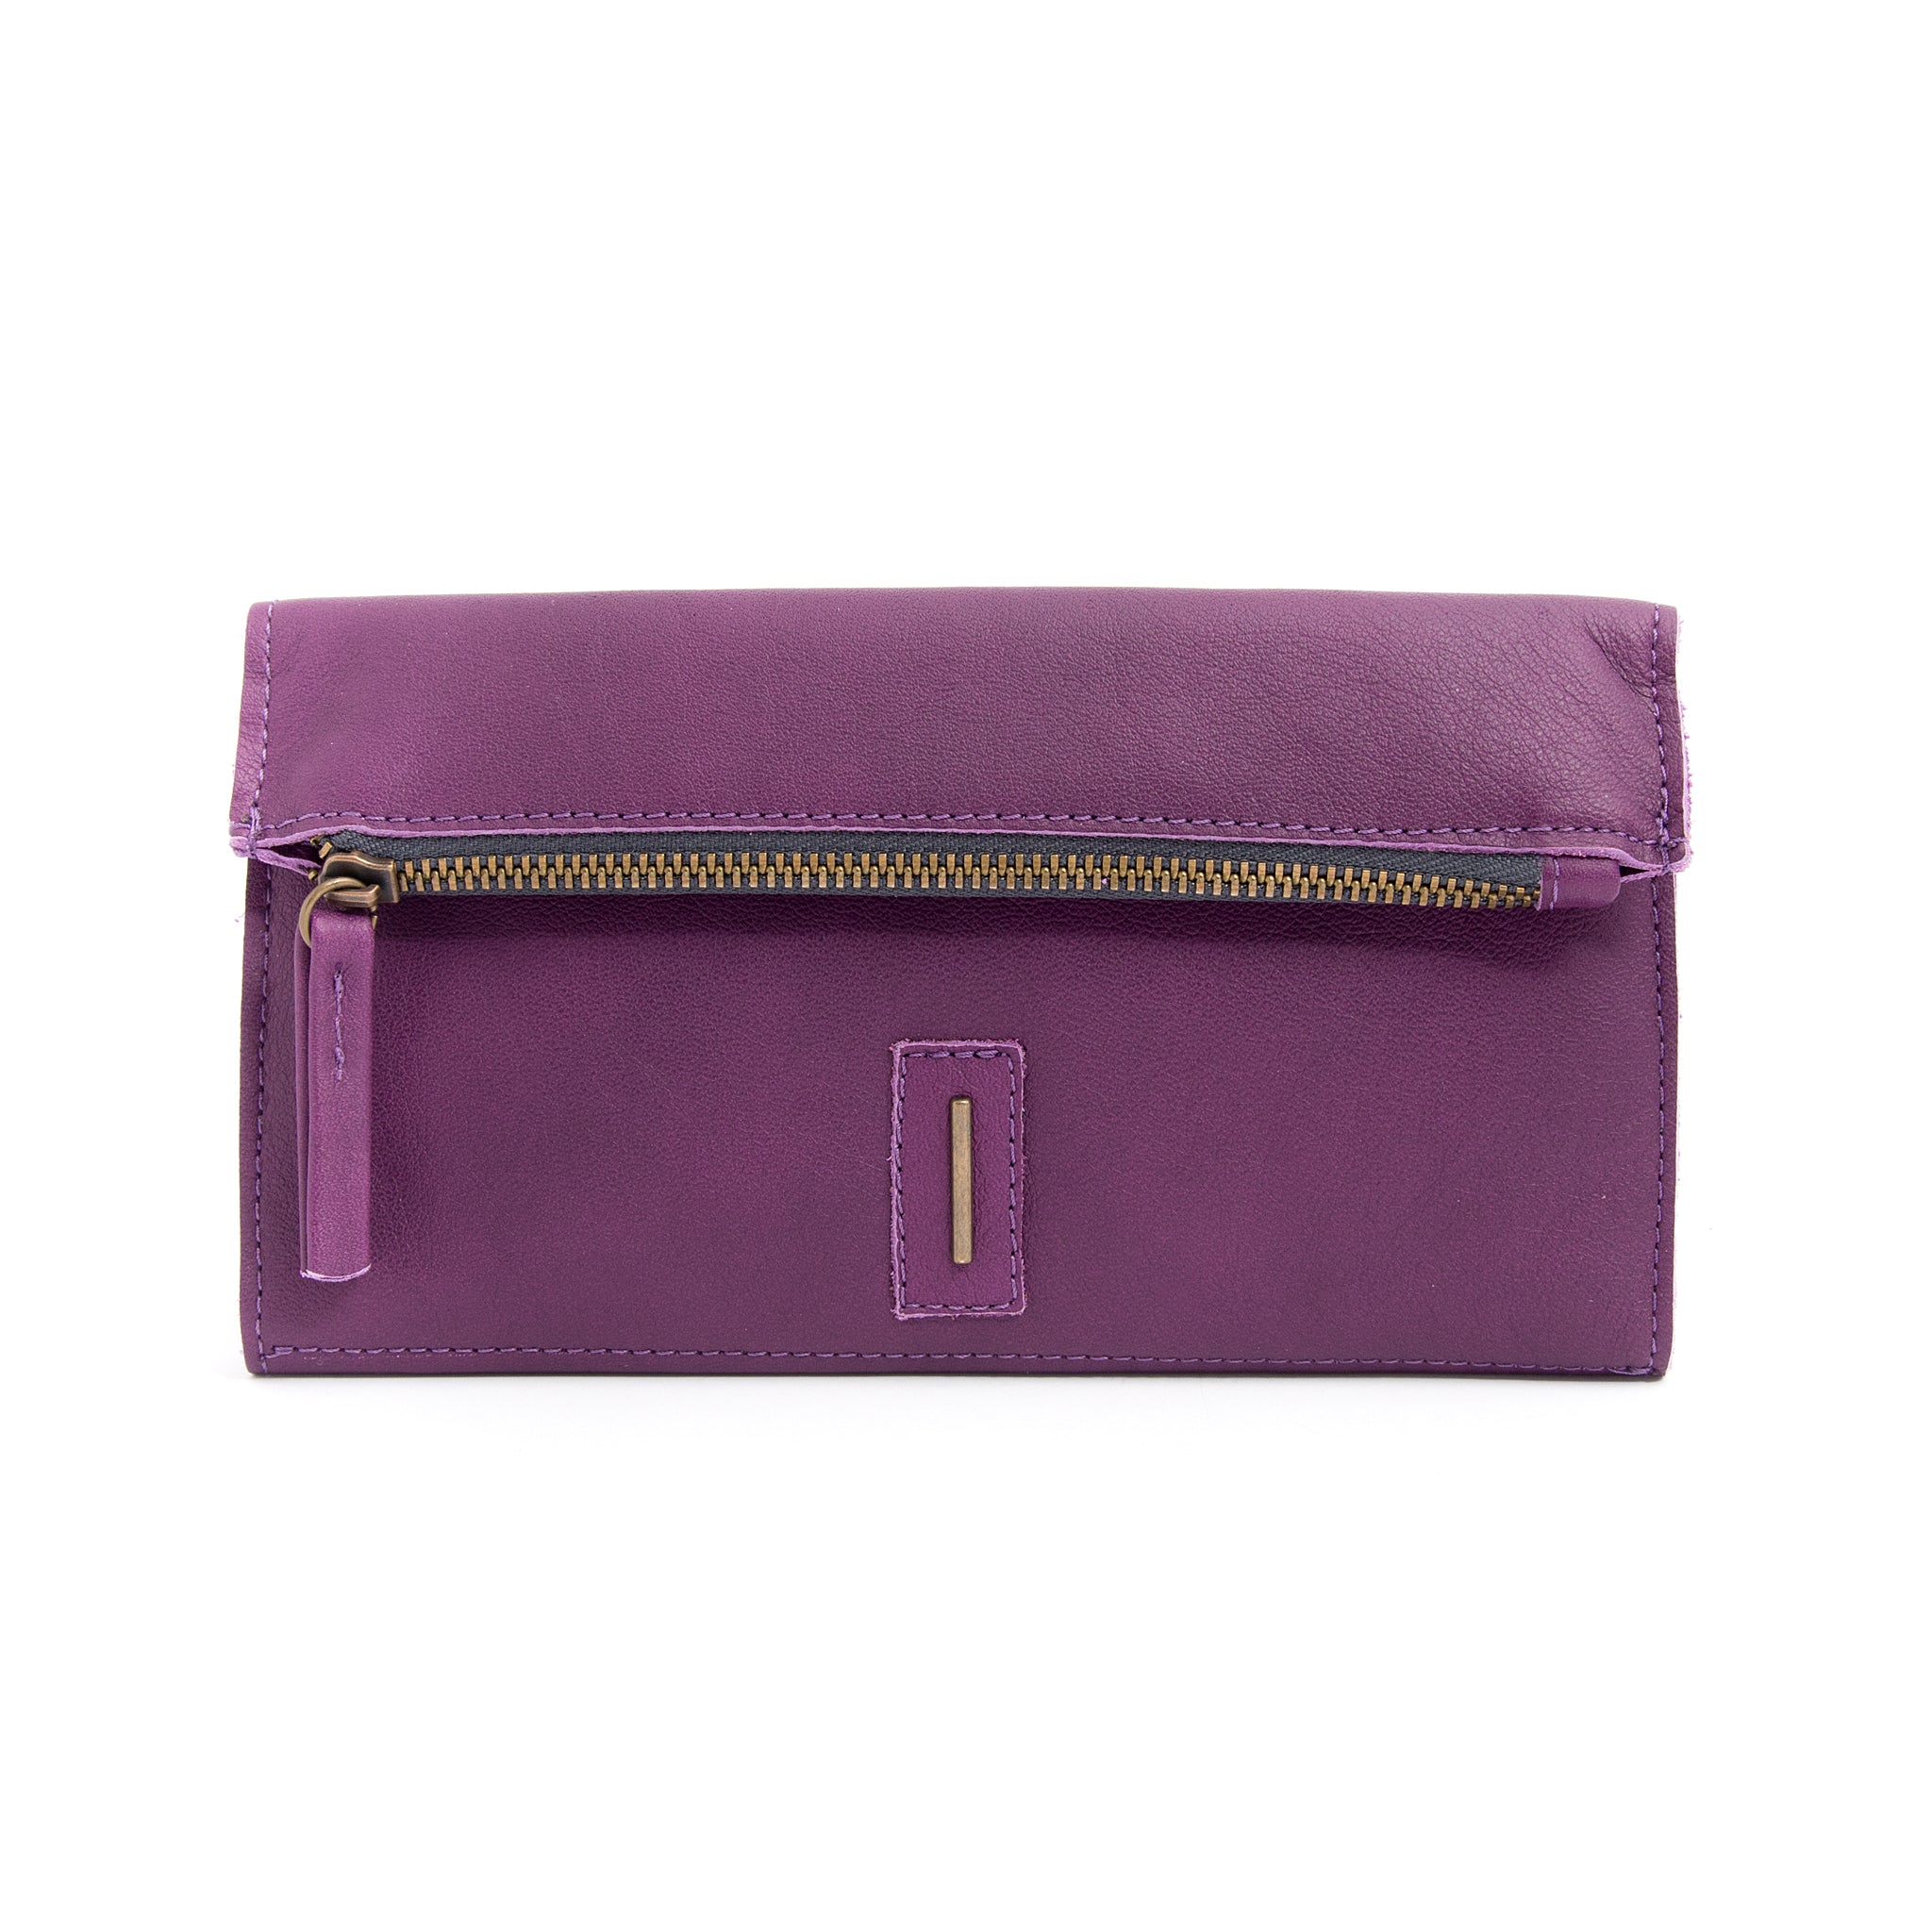 Max wallet mousse prugna - Marta Ray